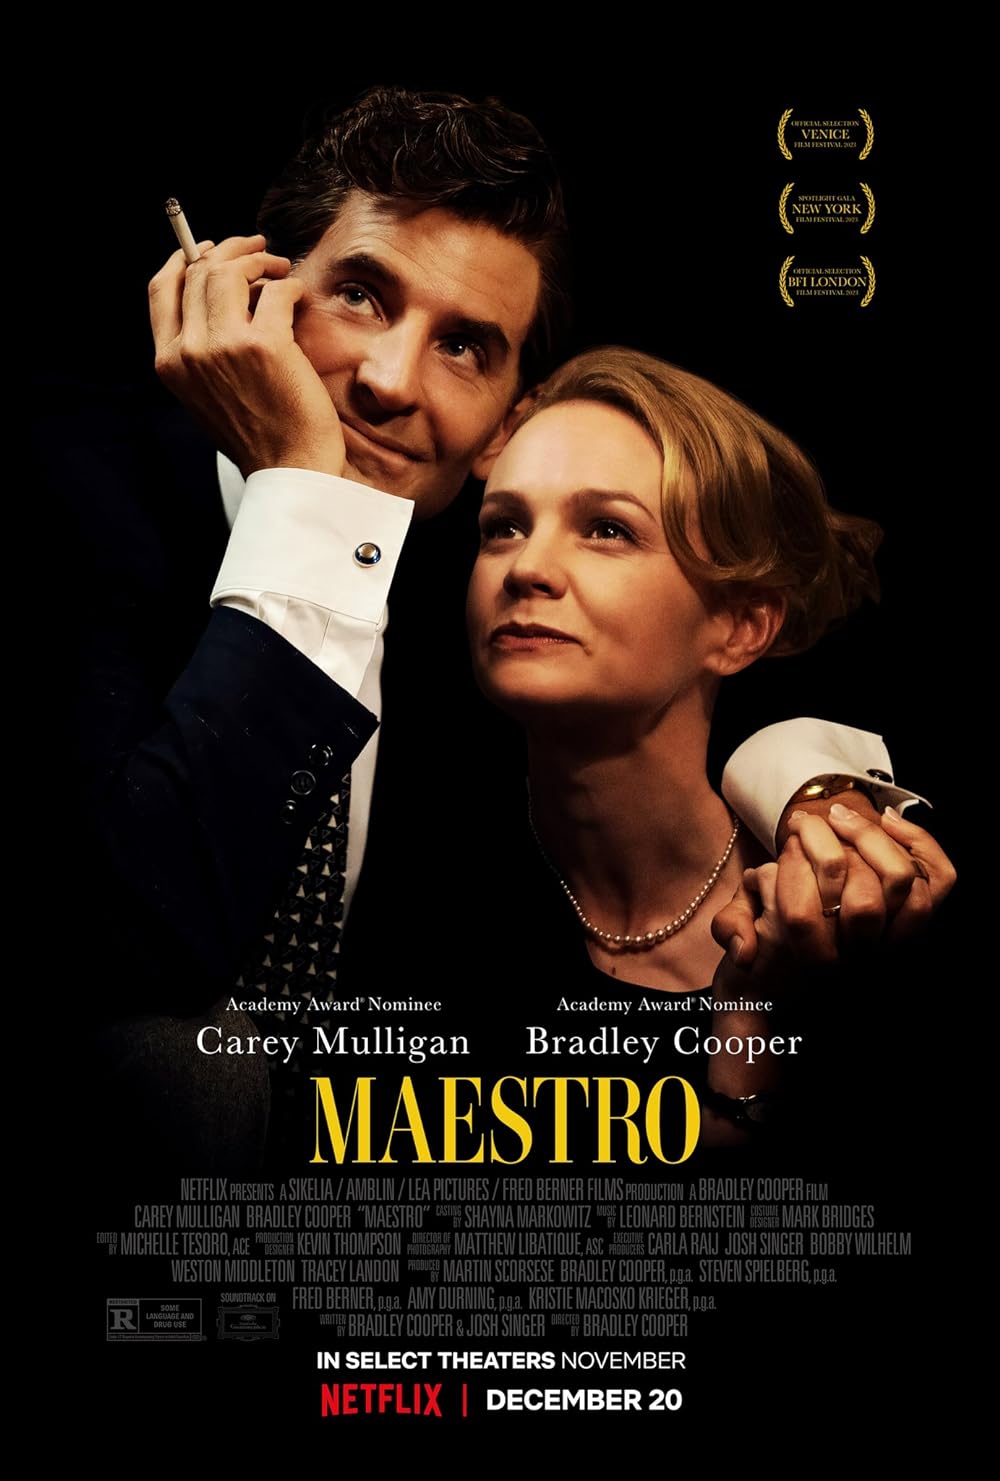 Maestro (December 20) -  NetflixExperience Bradley Cooper's directorial prowess and acting finesse in 